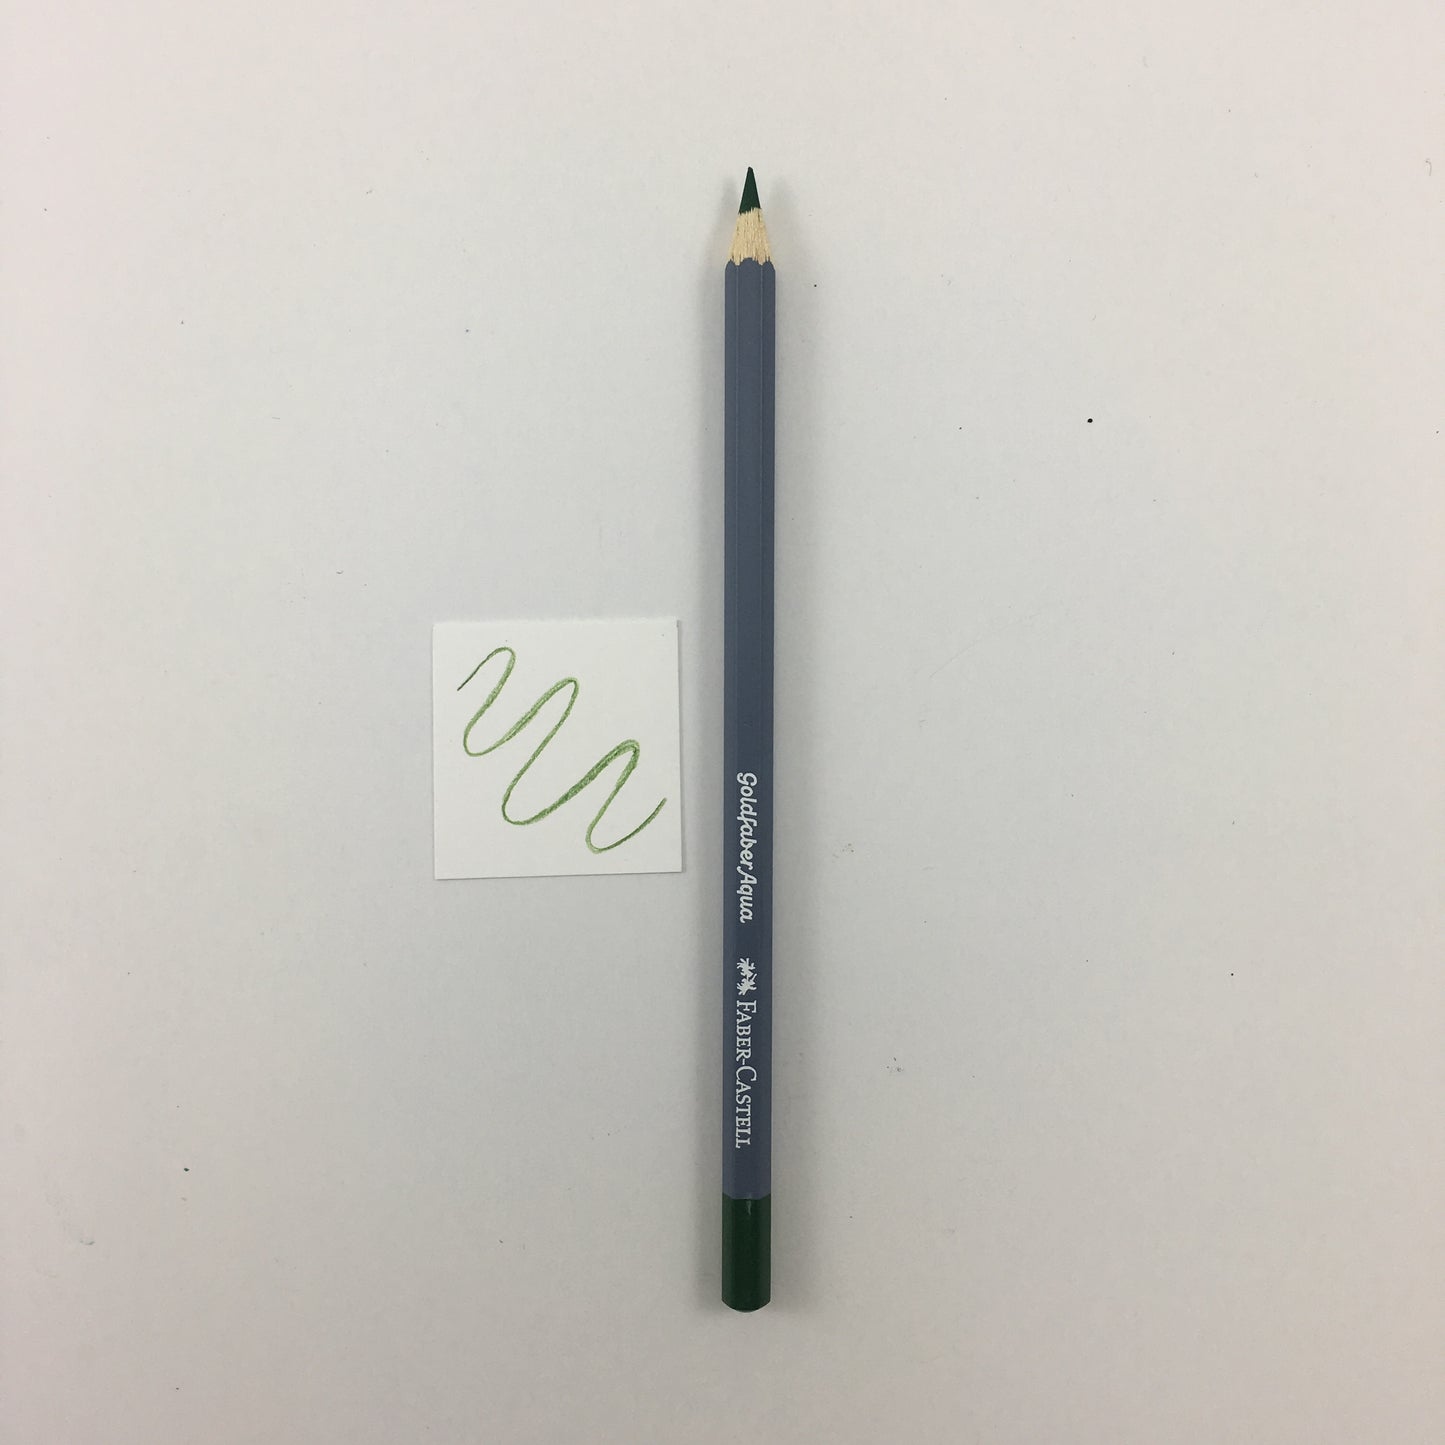 Faber-Castell Goldfaber Aqua Watercolor Pencils - Individuals - 167 - Permanent Green Olive by Faber-Castell - K. A. Artist Shop